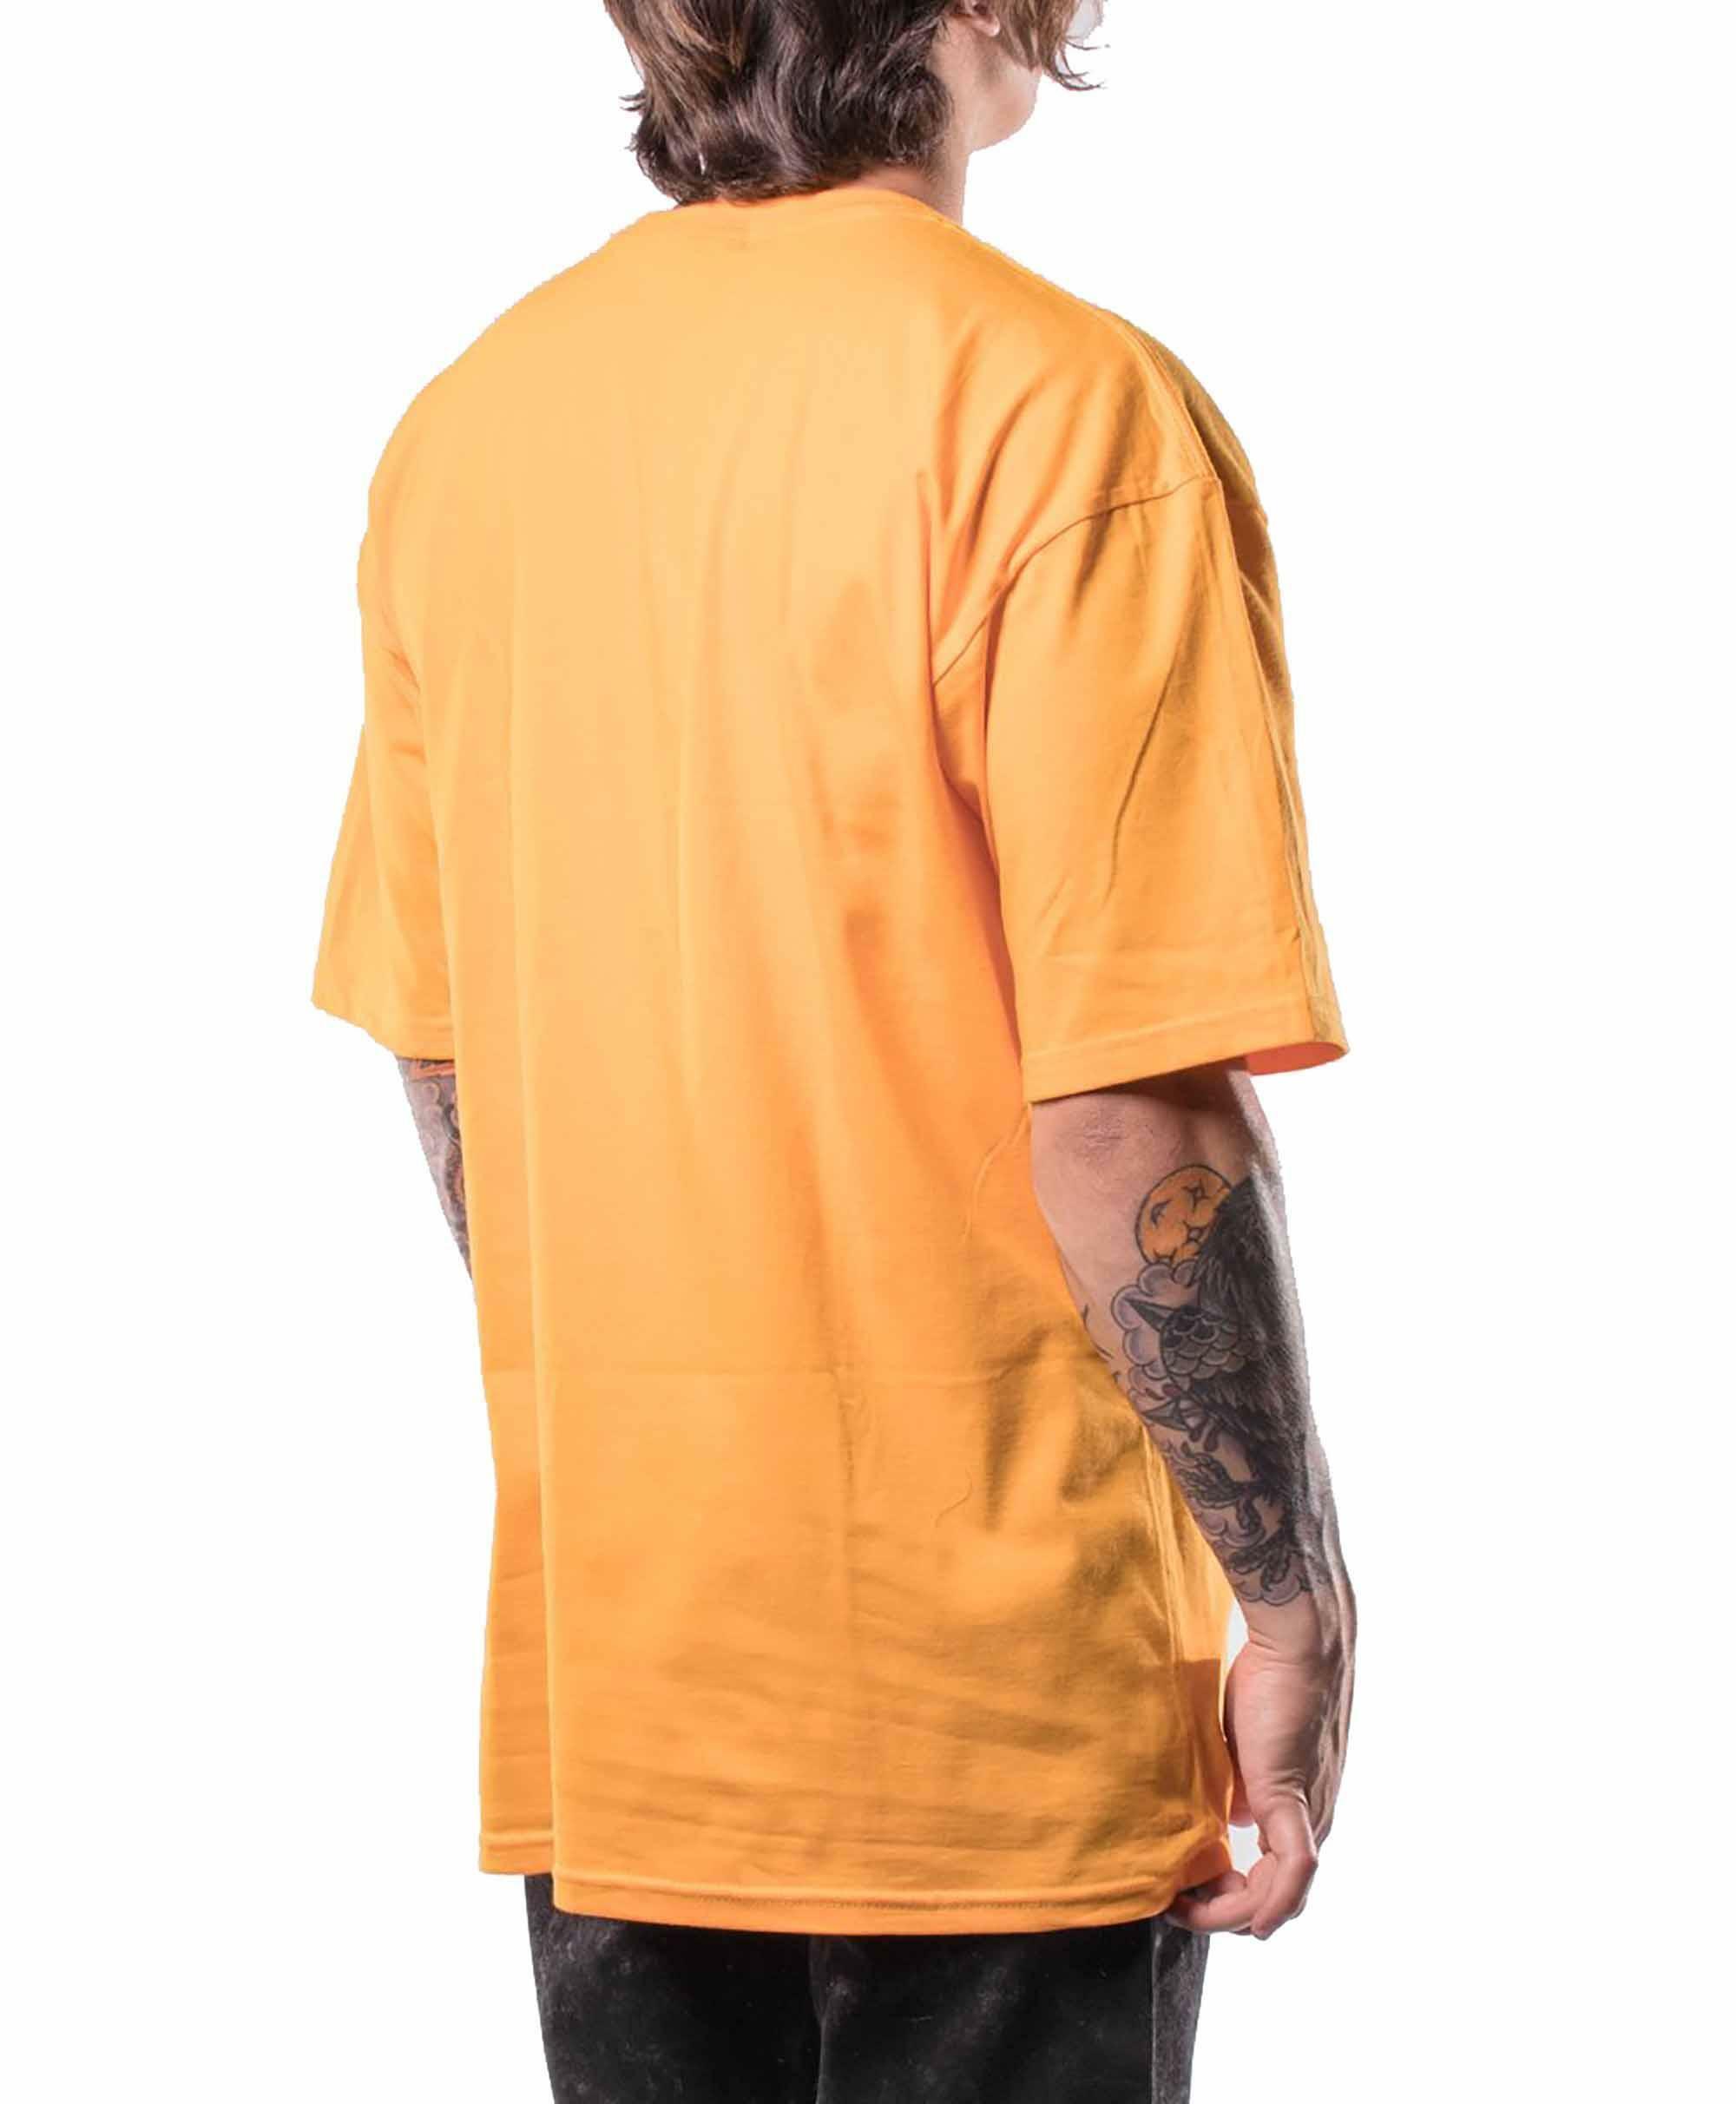 obey obey driver t-shirt uomo giallo 8111200